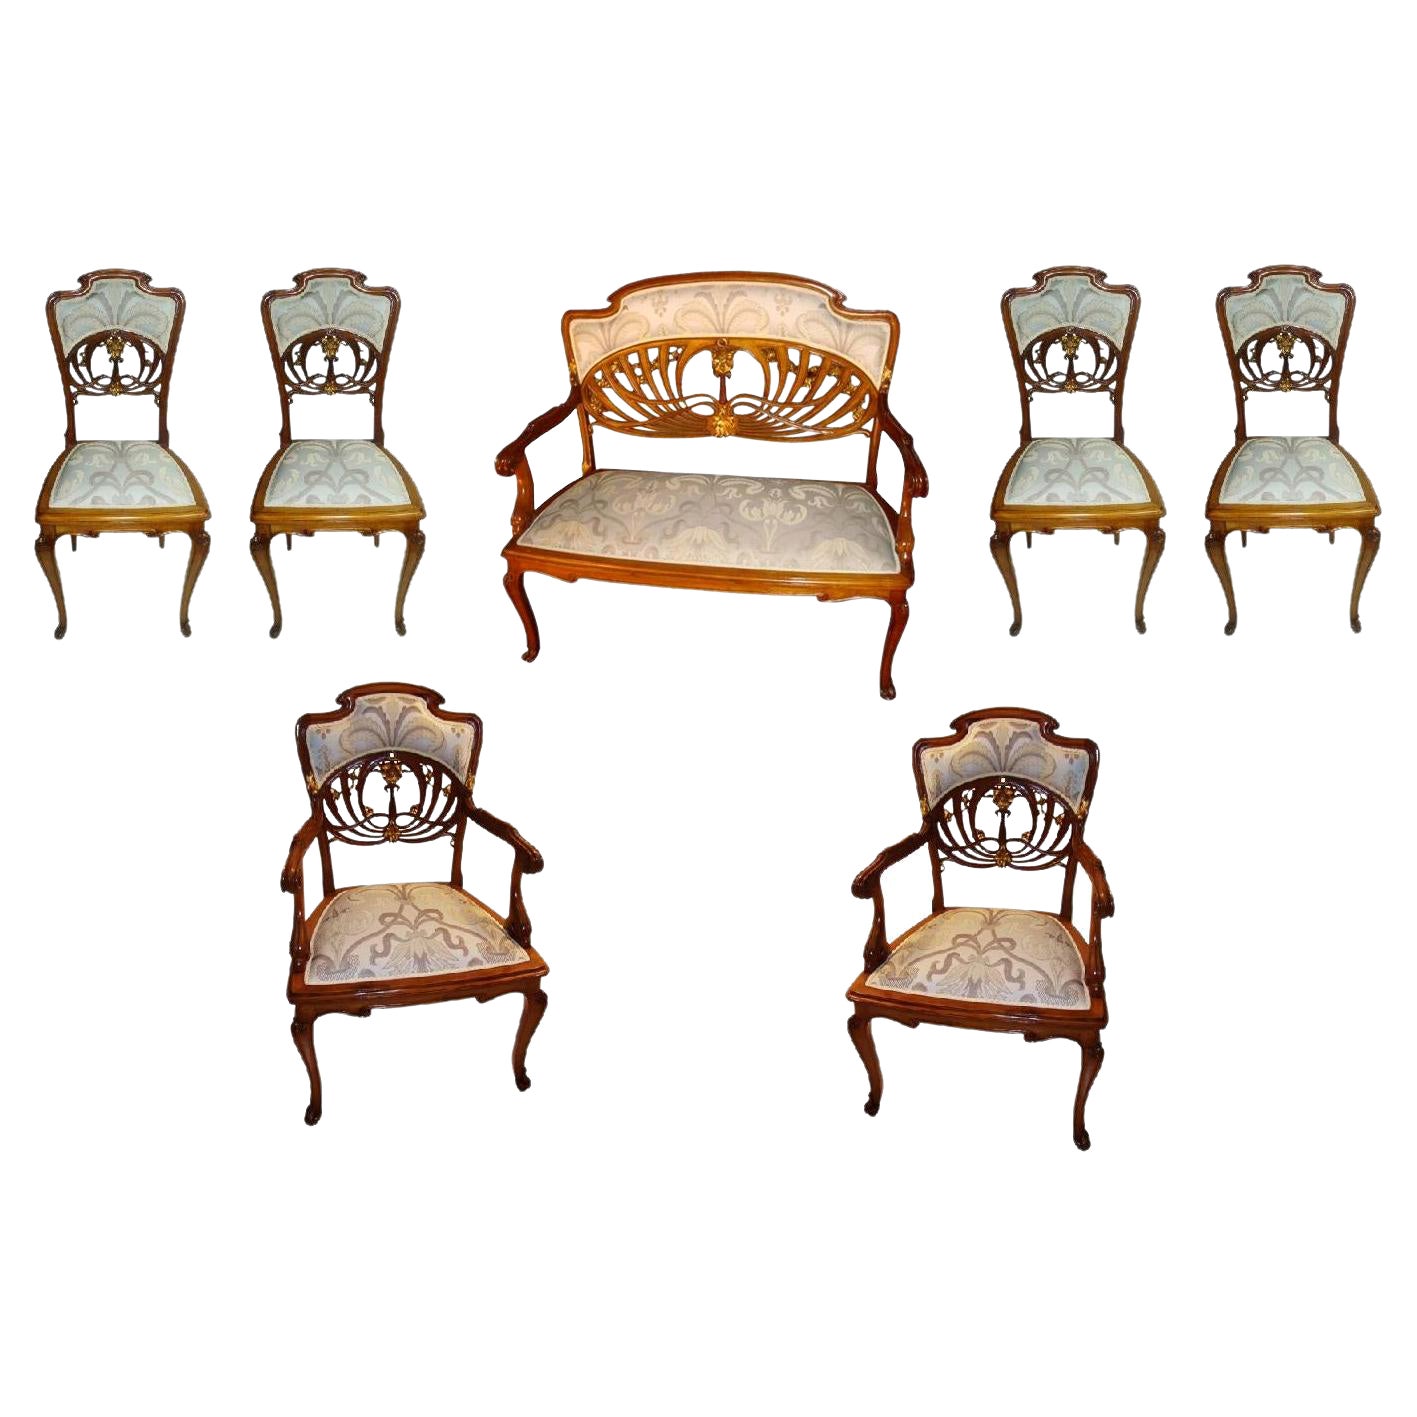 Unusual Art Nouveau Set, 1 Sofa, 2 Armchairs, 4 Chairs, Country, France, 1900 For Sale